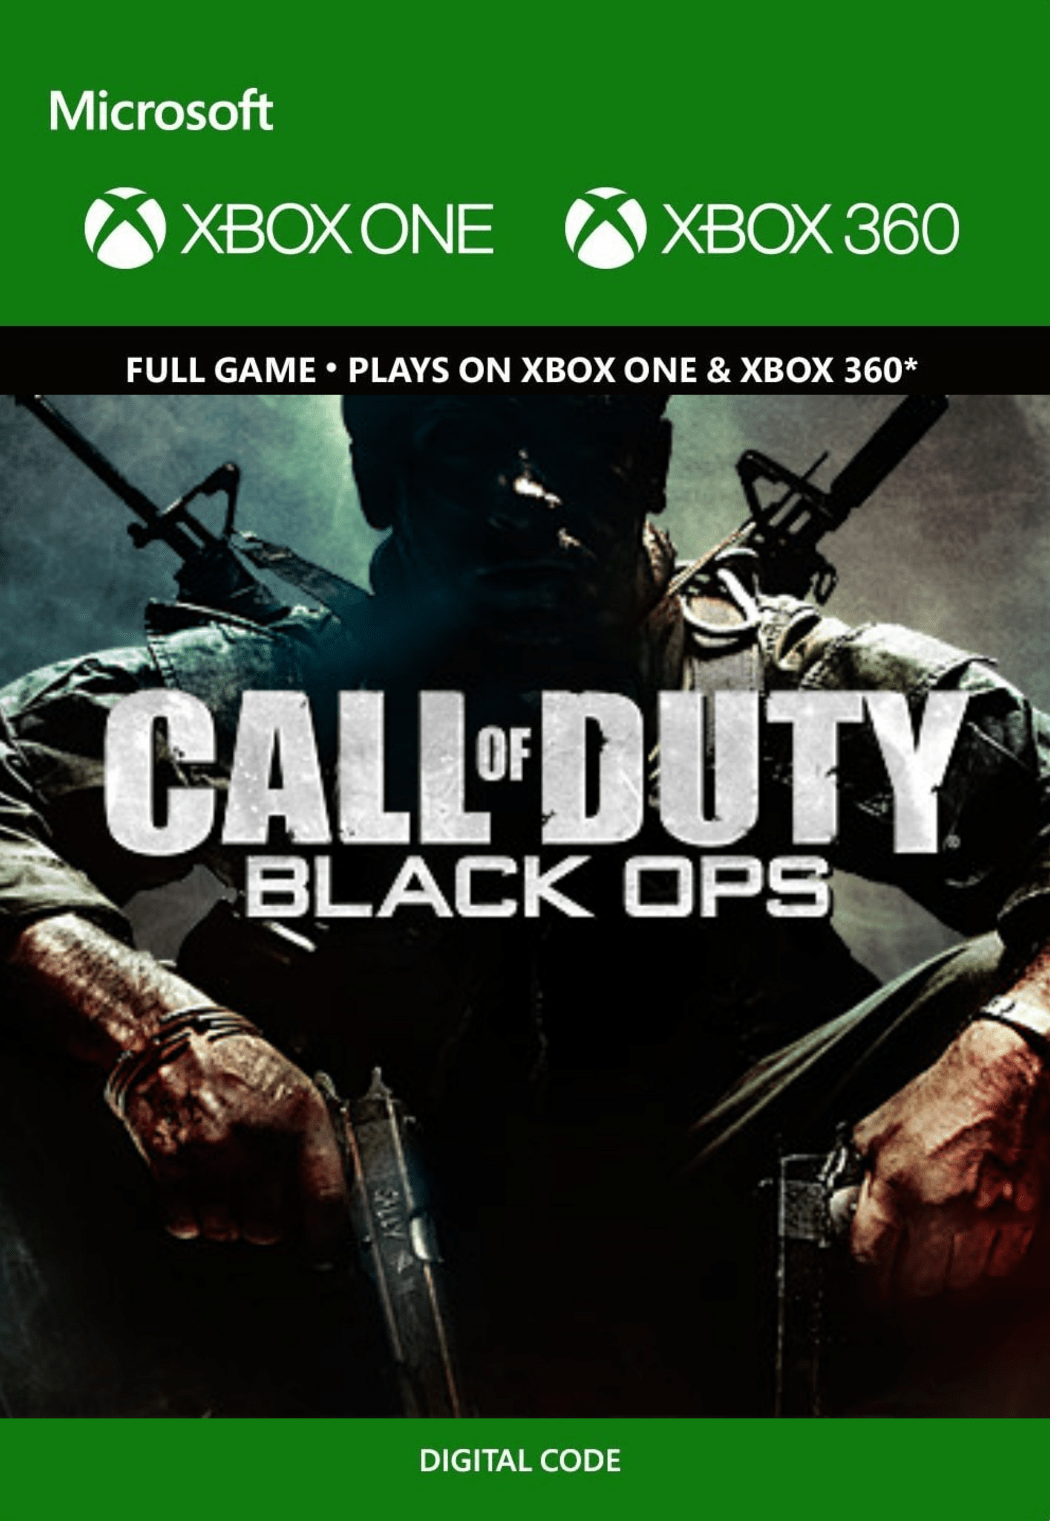 Call of Duty: Black Ops II Is Now Available On Xbox One Backward  Compatibility - Xbox Wire